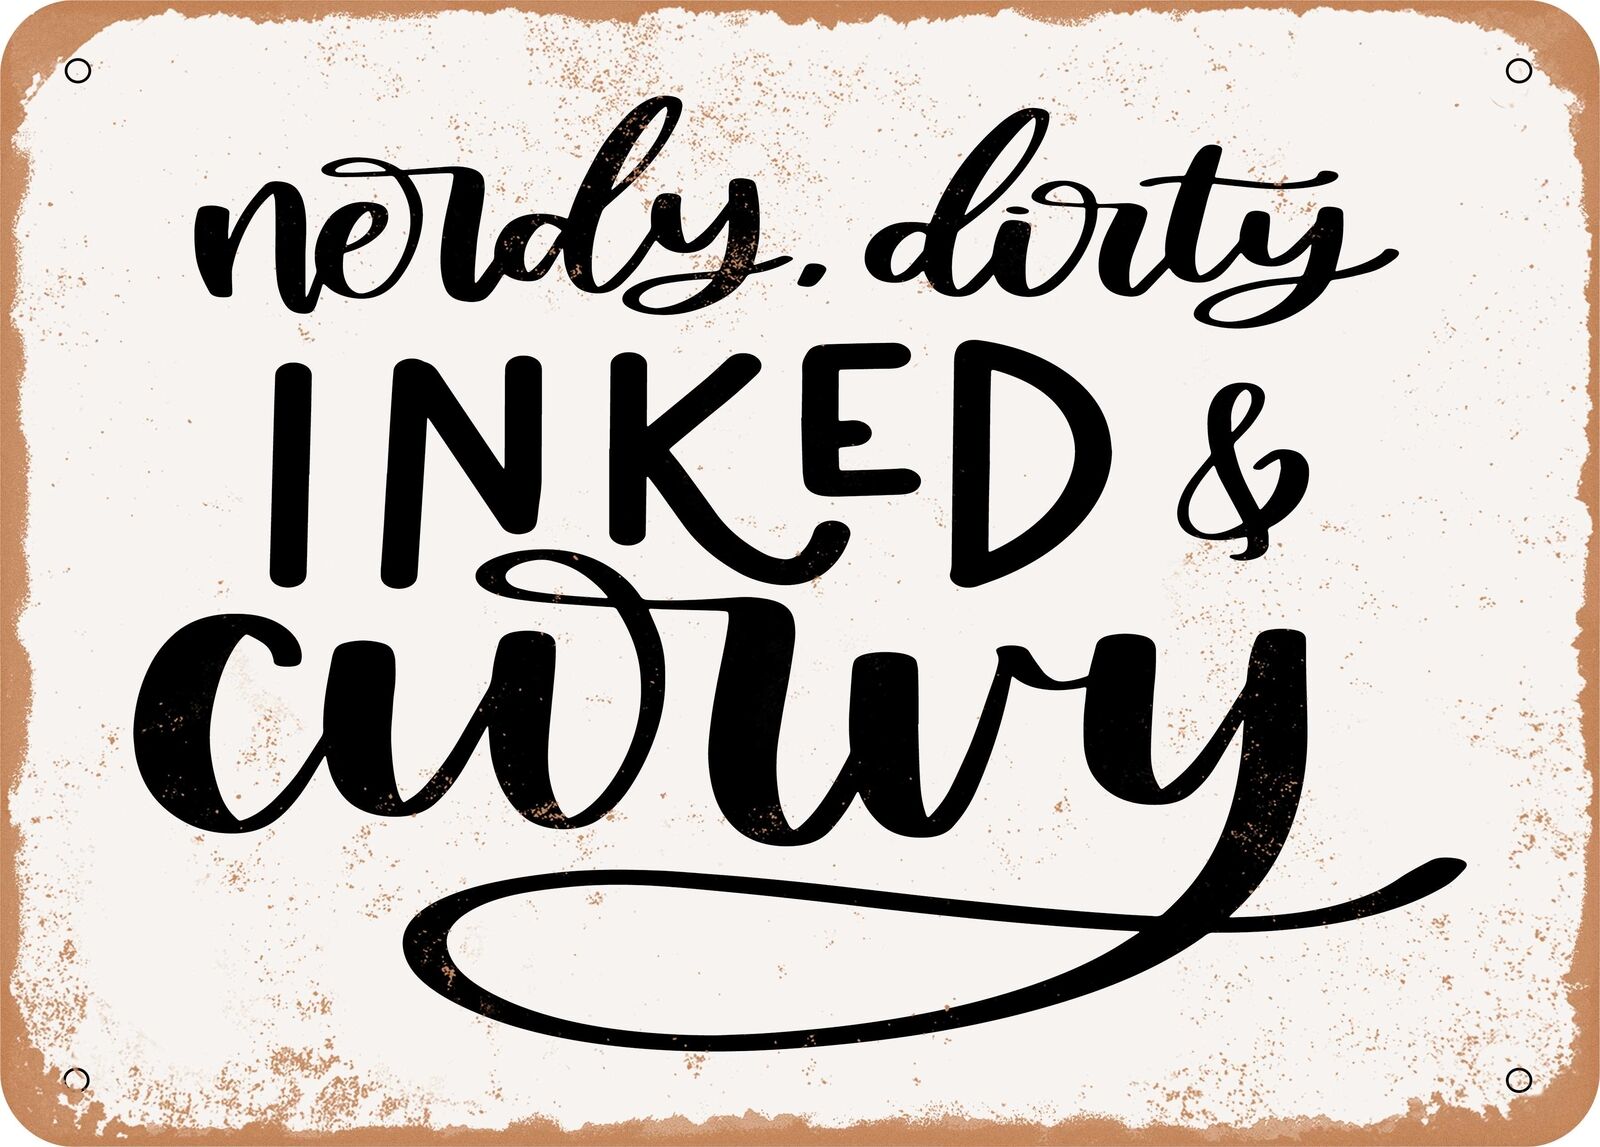 Metal Sign - Nerdy Dirty Inked and Curvy - Vintage Look Sign